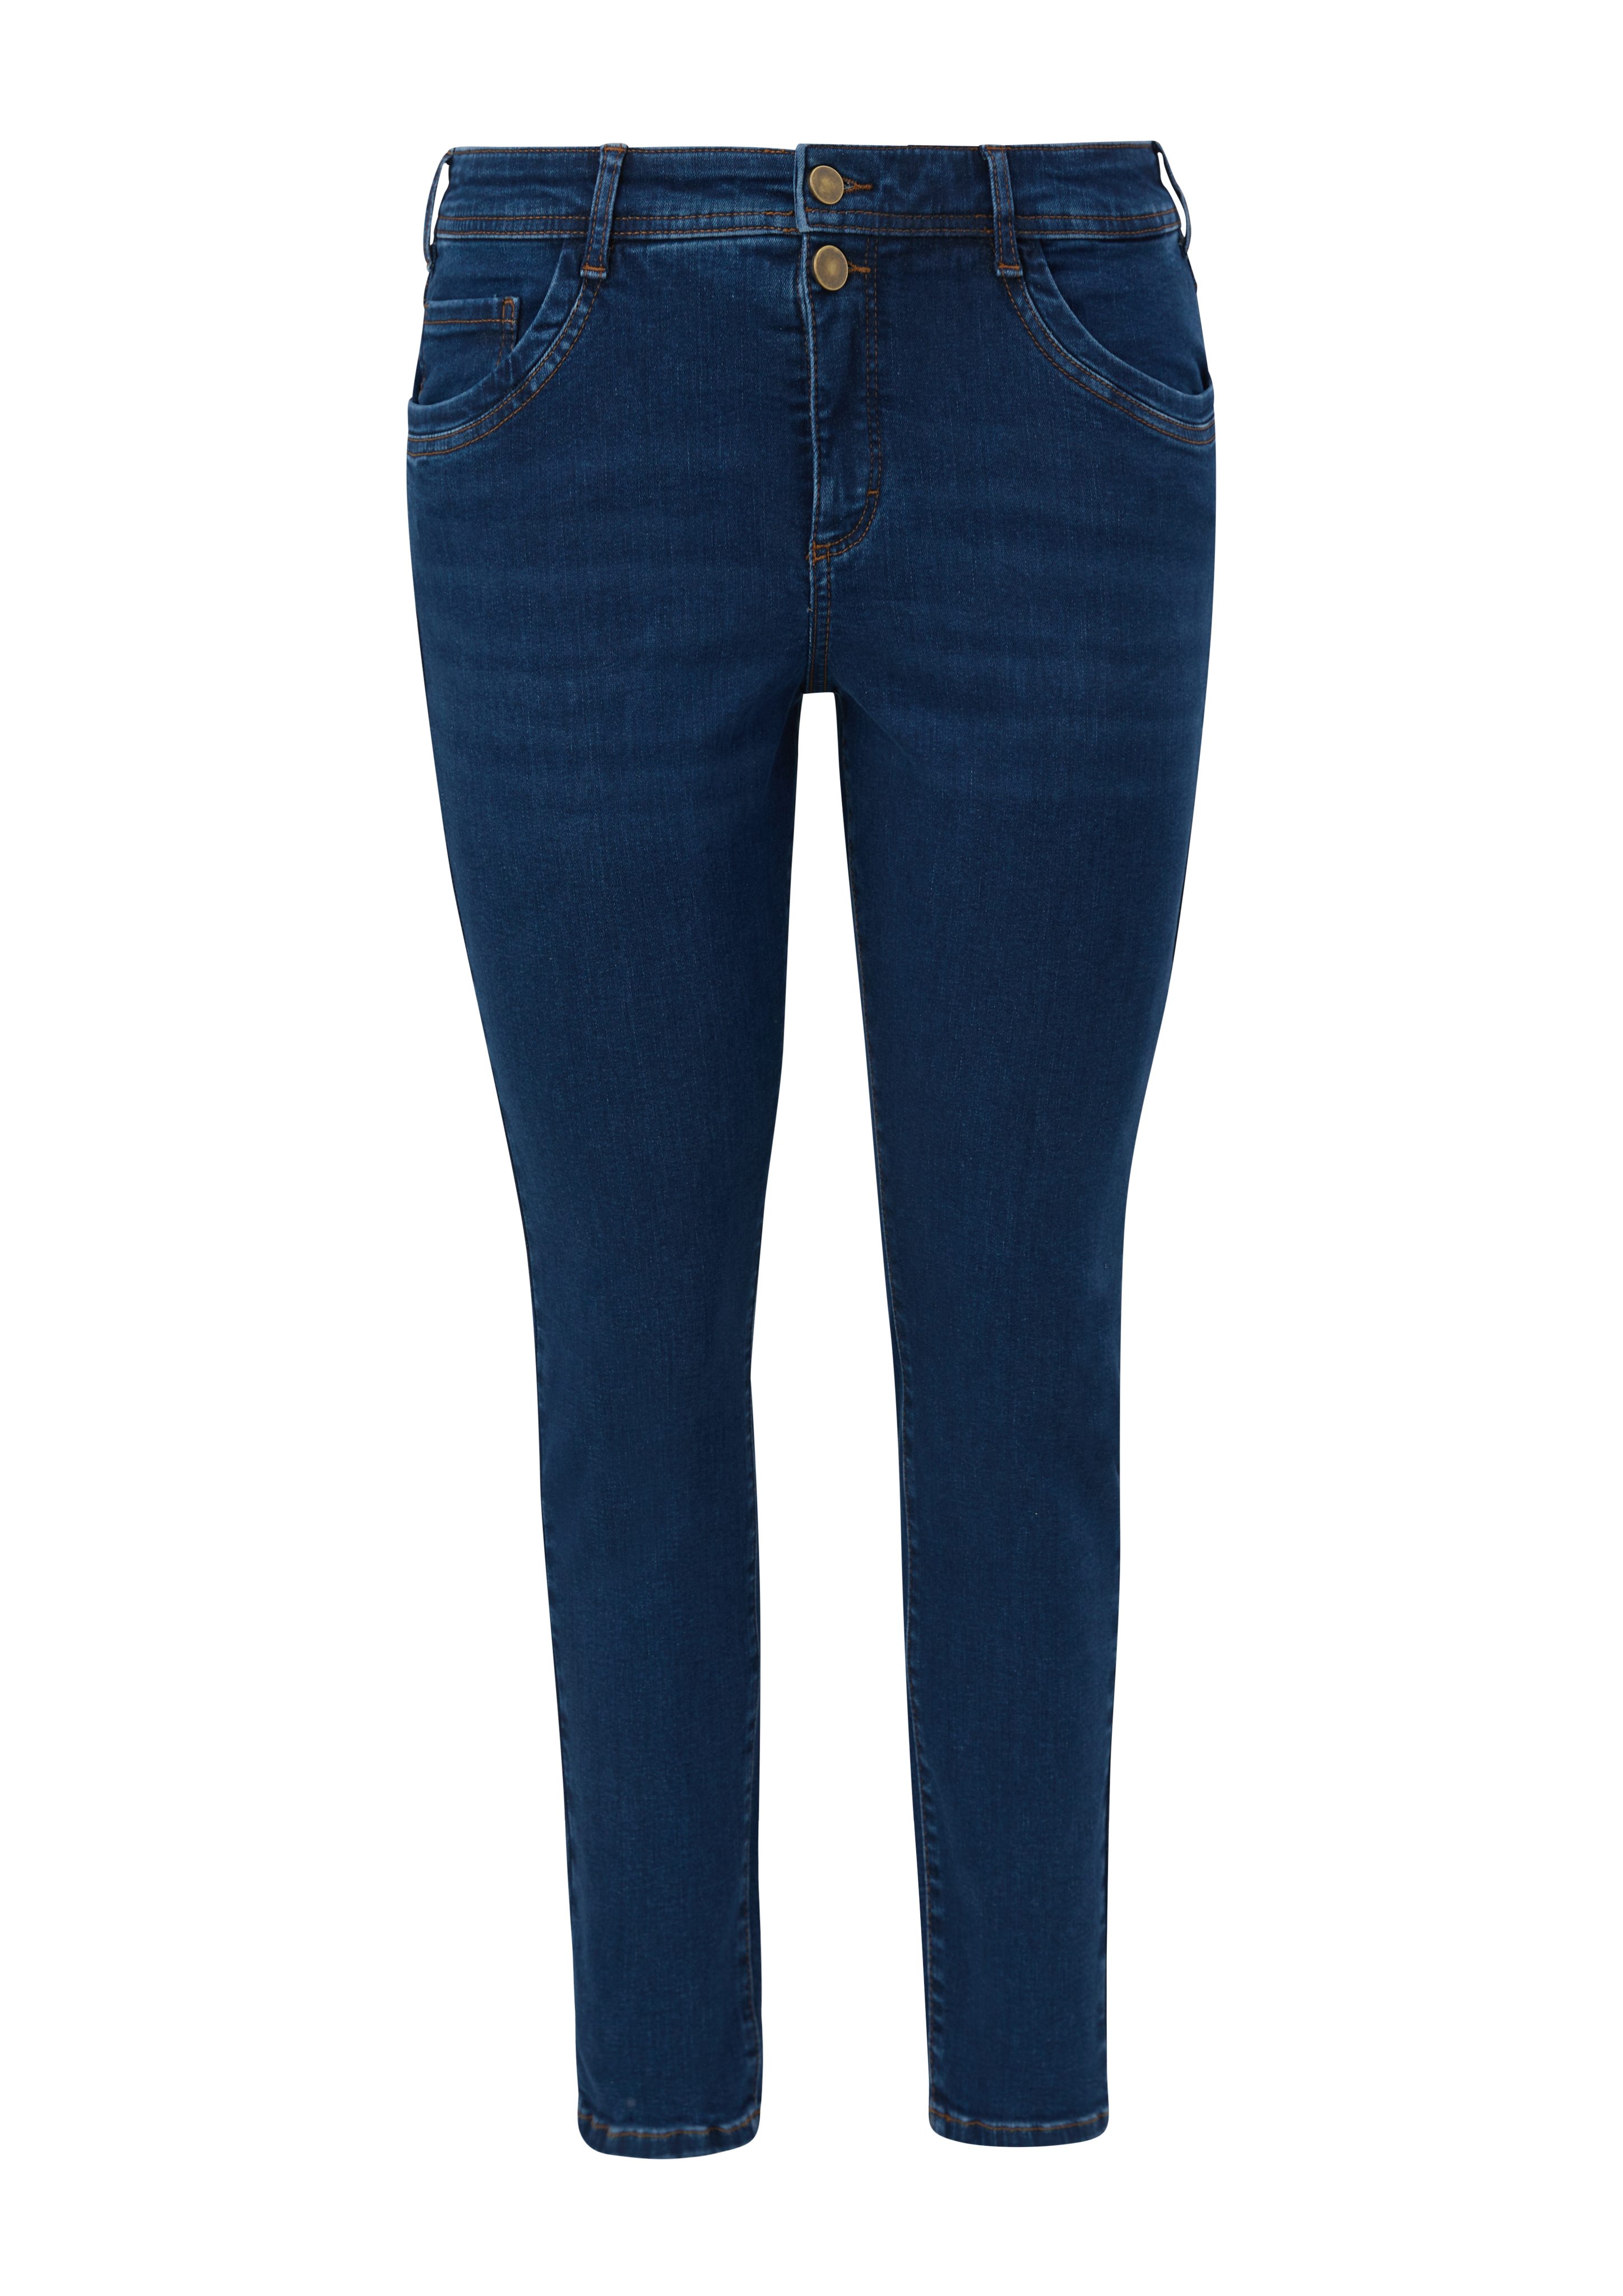 / Stoffhose Rise Waschung Logo, Skinny Mid TRIANGLE Jeans